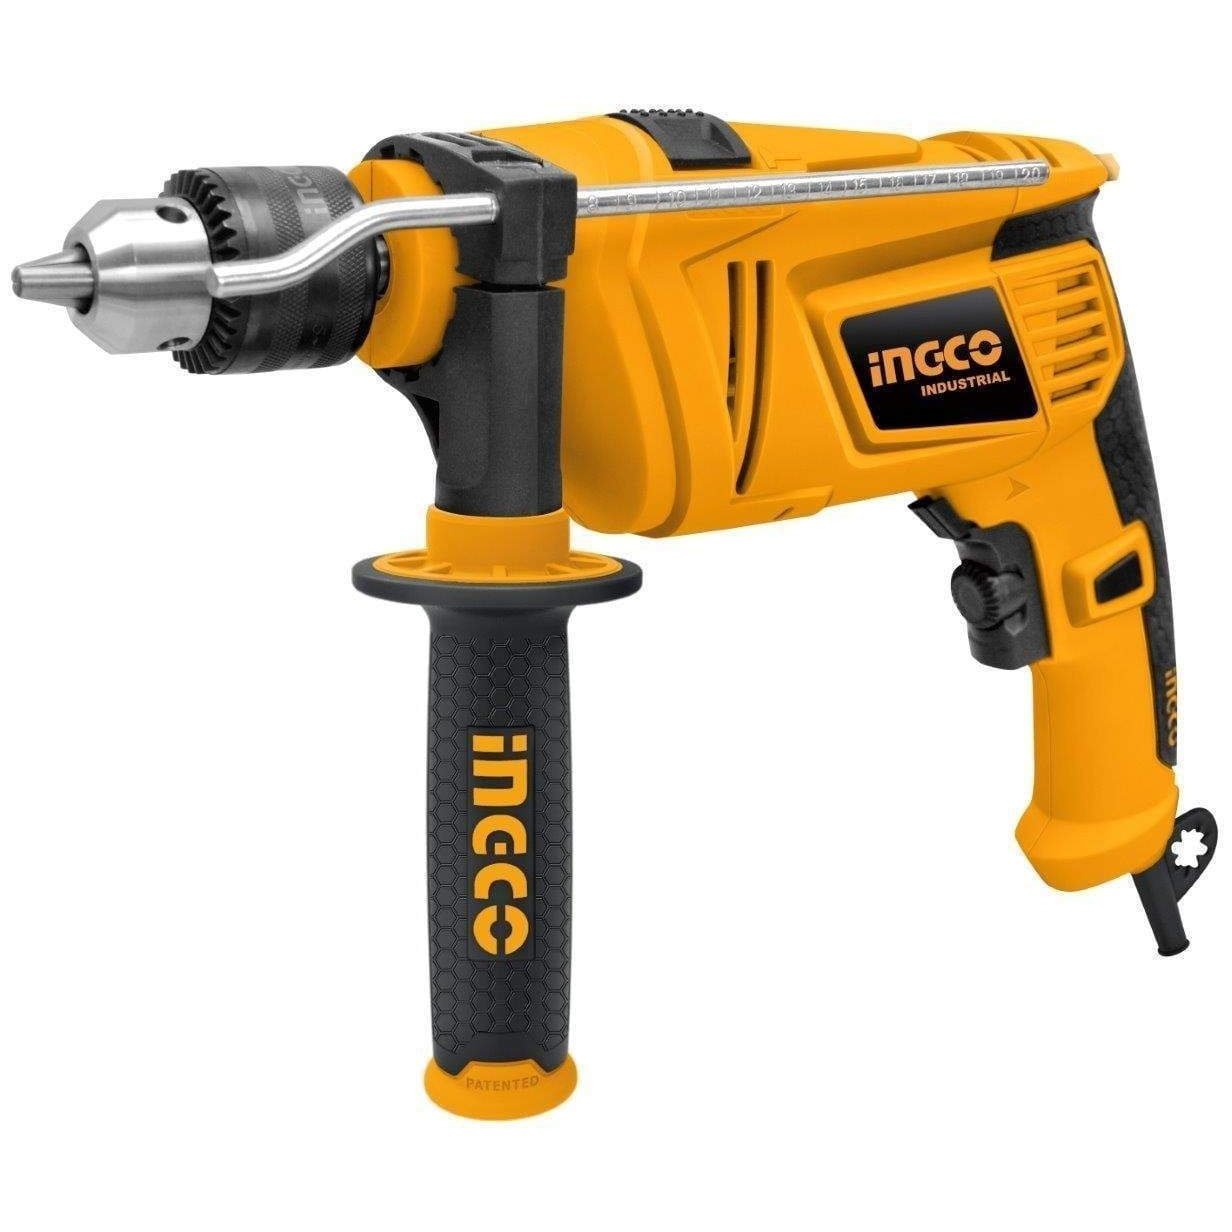 Ingco Hammer Impact Drill 13mm 850W - ID8508 | Supply Master | Accra, Ghana Tools Buy Tools hardware Building materials